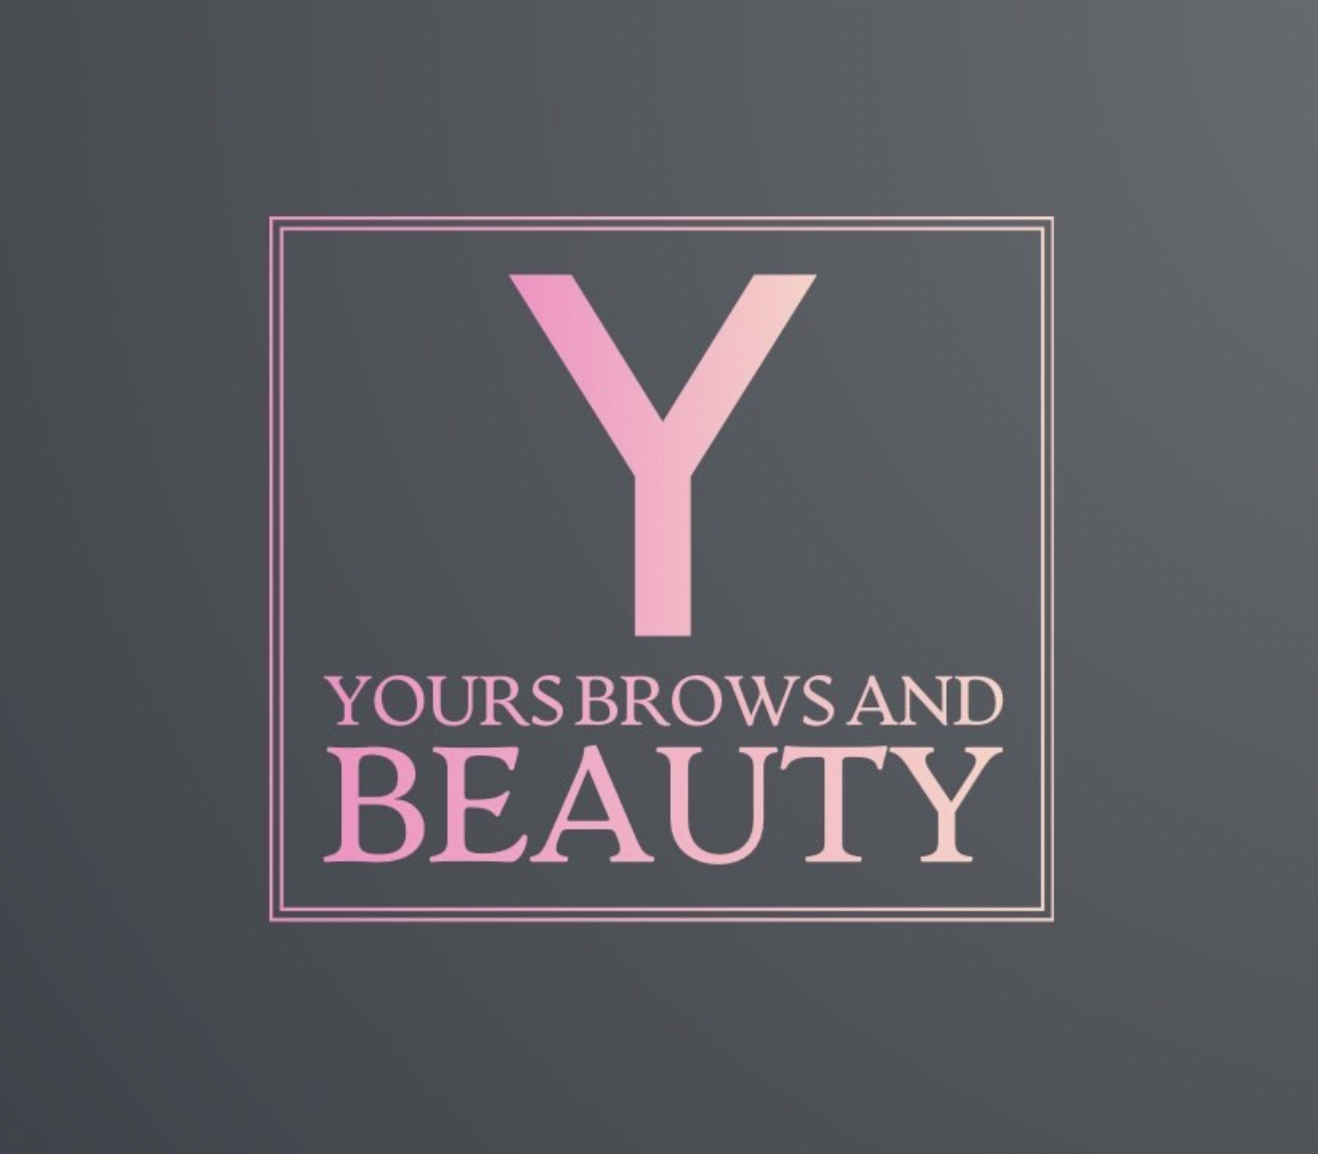 YOURS BROWS AND BEAUTY logo